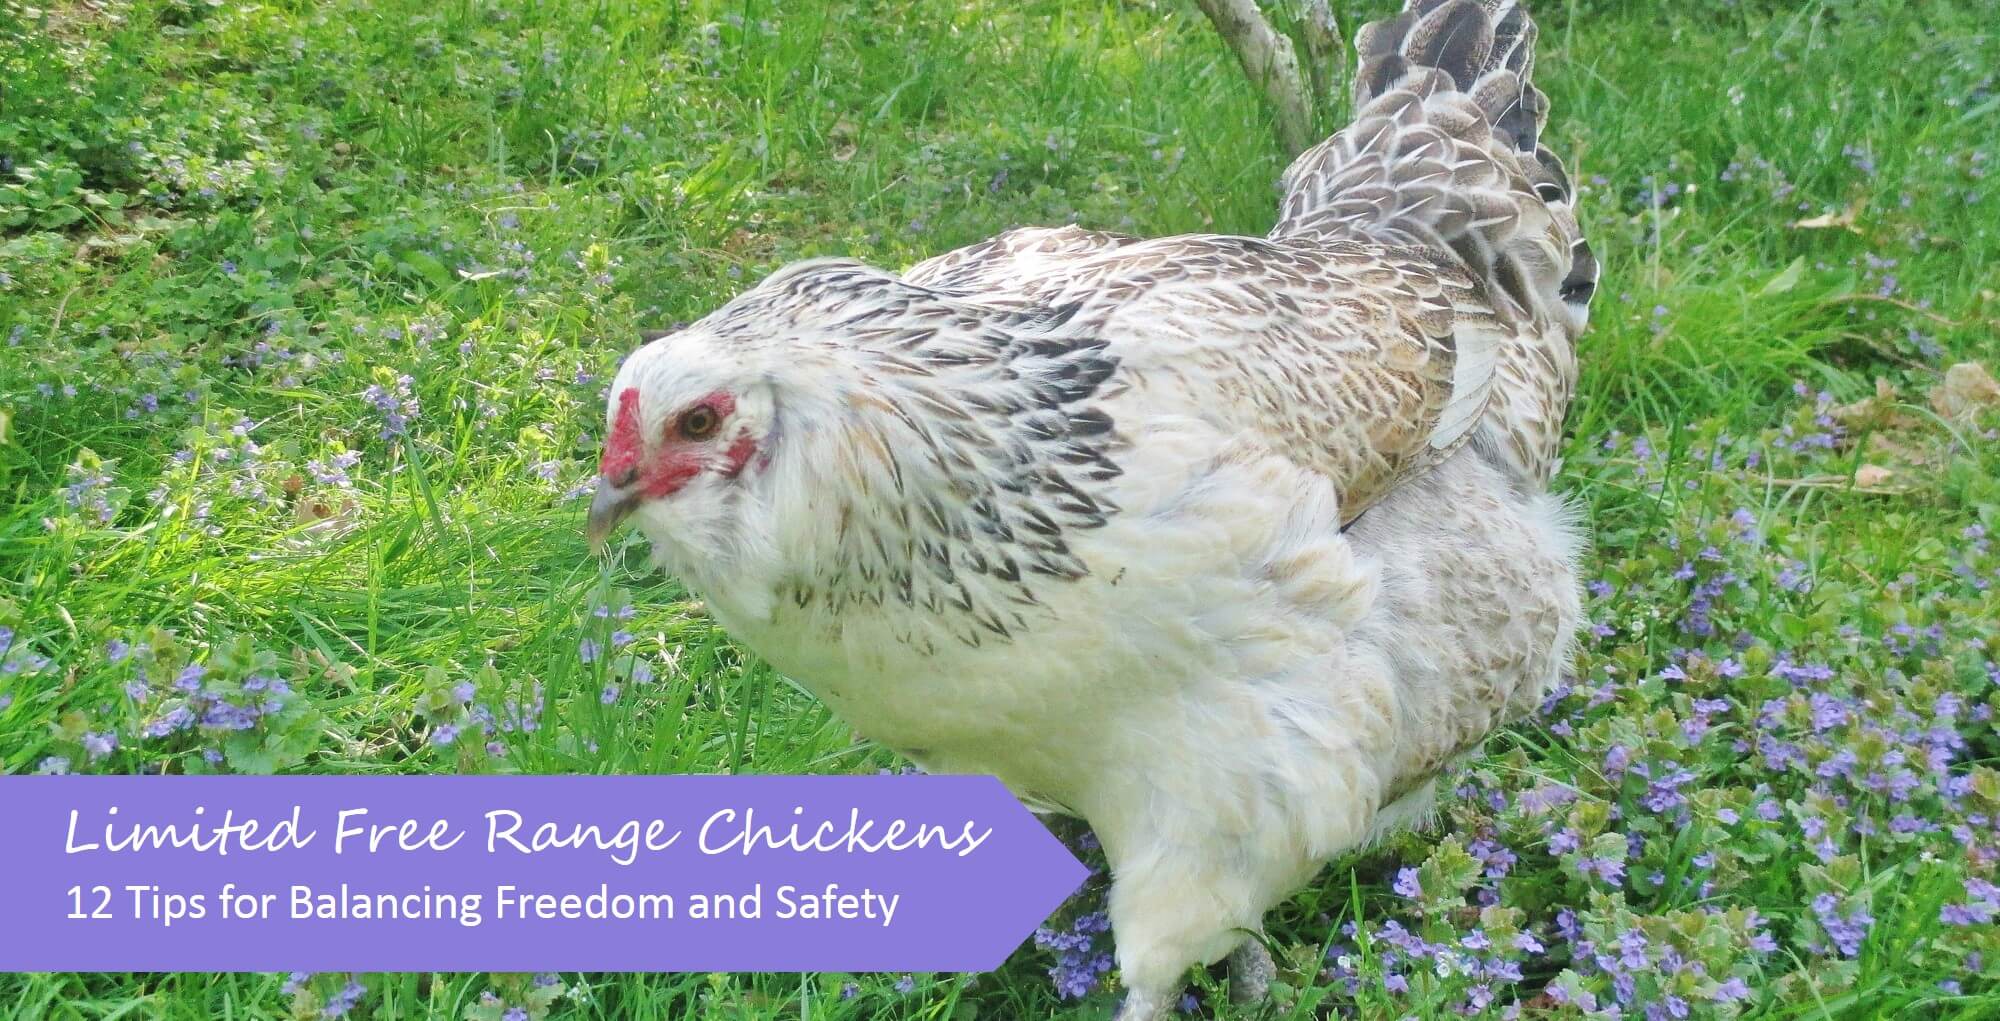 The idea of true free range chickens is great, but in reality it's dangerous. To balance freedom and safety, we use a modified free range system which we describe in detail, along with tips on fencing, layout and location of chicken yard, providing cover, choosing appropriate chicken breeds, etc., so that you can develop your own limited free range system.